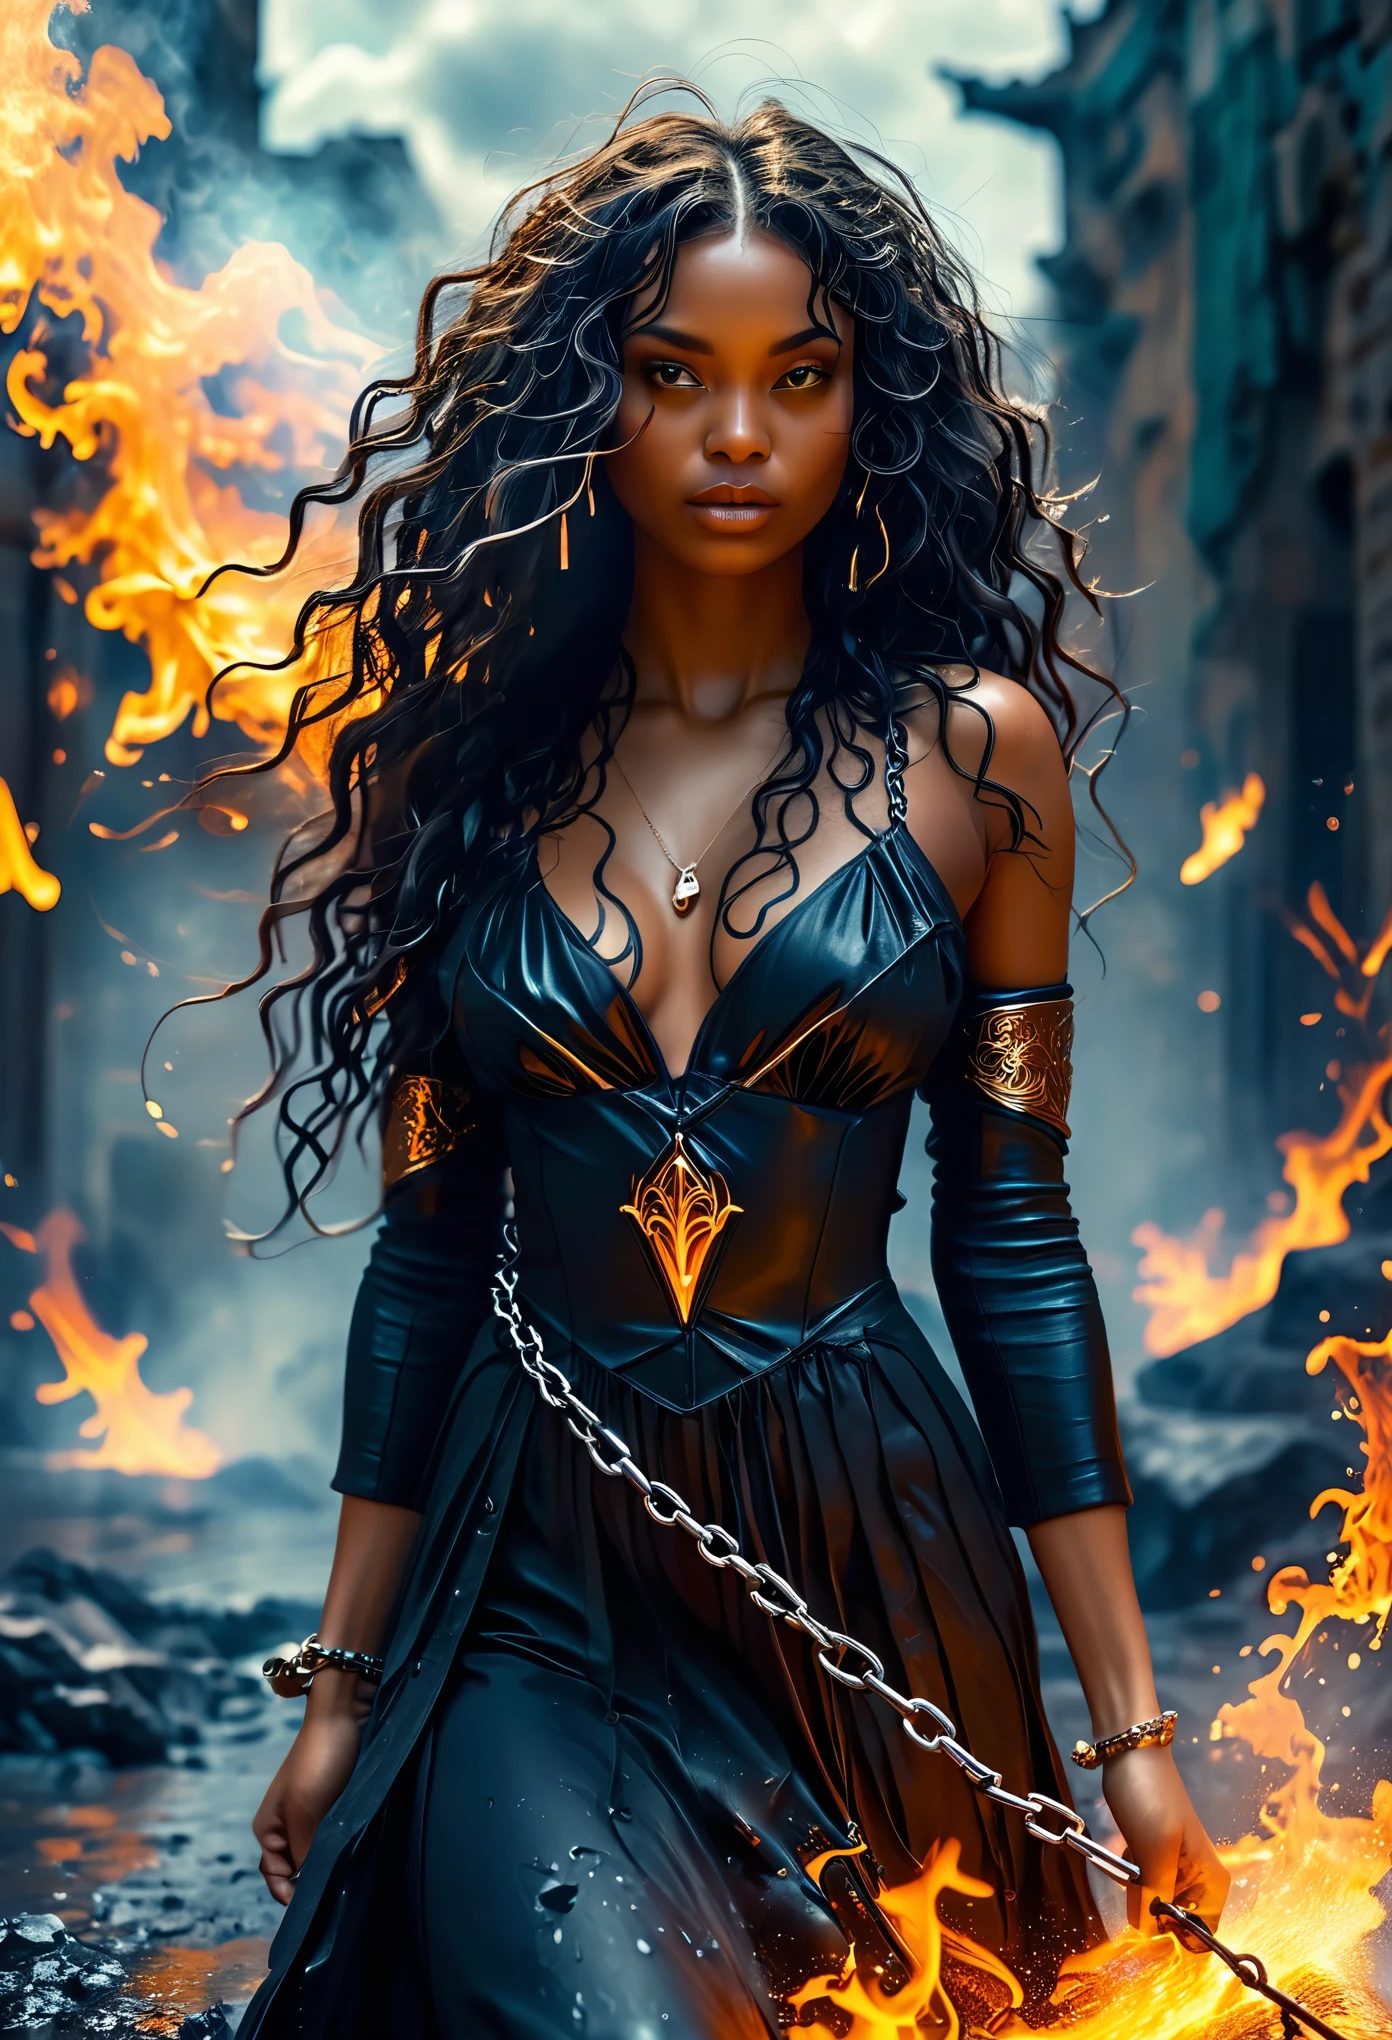 Novel in chaotic and destroy landscape, an brown skin woman with long dark curly hair, very beautiful 18's woman, chained and wrapped in burning chains, wearing a long black african dress, metallic texture, demonic, wielding immense power, melting chains, scorching heat,rays of light piercing through the cracks,ominous shadows,exquisite detailing,steaming heat waves,smoke rising,,fireworks-like sparks,dramatic composition,dark fantasy,emerald flames,burning tattoos,fiery destruction,apocalyptic scene,crumbling ruins,distant flames,molten lava,unstoppable force,battlefield devastation,constantly growing in size,threatening clouds looming above,crimson danger,indomitable spirit,enchanted chains,,stunningly beautiful,demonic transformation,transcendent power,untamed chaos, 8K, Extremely detailed, (high quality, Realistic, photoRealistic: 1.37), tout le corps, ideal proportions and defined complexion, Meticulously designed features, inaccessible beauty, la perfection, chef artistique&#39;ouvrages d&#39;arts, vivid realism, sculptures hyper detailedes, formes Realistics, vraiment impressionnant, Un savoir-faire impeccable, pure shine, ethereal beauty, Delicate contours, Poses frappantes, sublime beauty, nuances subtiles, compositions dynamiques, couleurs vives, Perfect lighting, Expressions en mouvement, Celestial aura, Majestic presence, Ambiance onirique, rendu d&#39;octane detailed inégalé, tendance sur artstation, Photographie artistique 8k, photoRealistic concept art, Naturel, doux, Volumetric cinematic perfect light, clair-obscur, Award-winning photography, chef-d&#39;ouvrages d&#39;art, huile sur toile, beau, detailed, complexe, incroyablement
